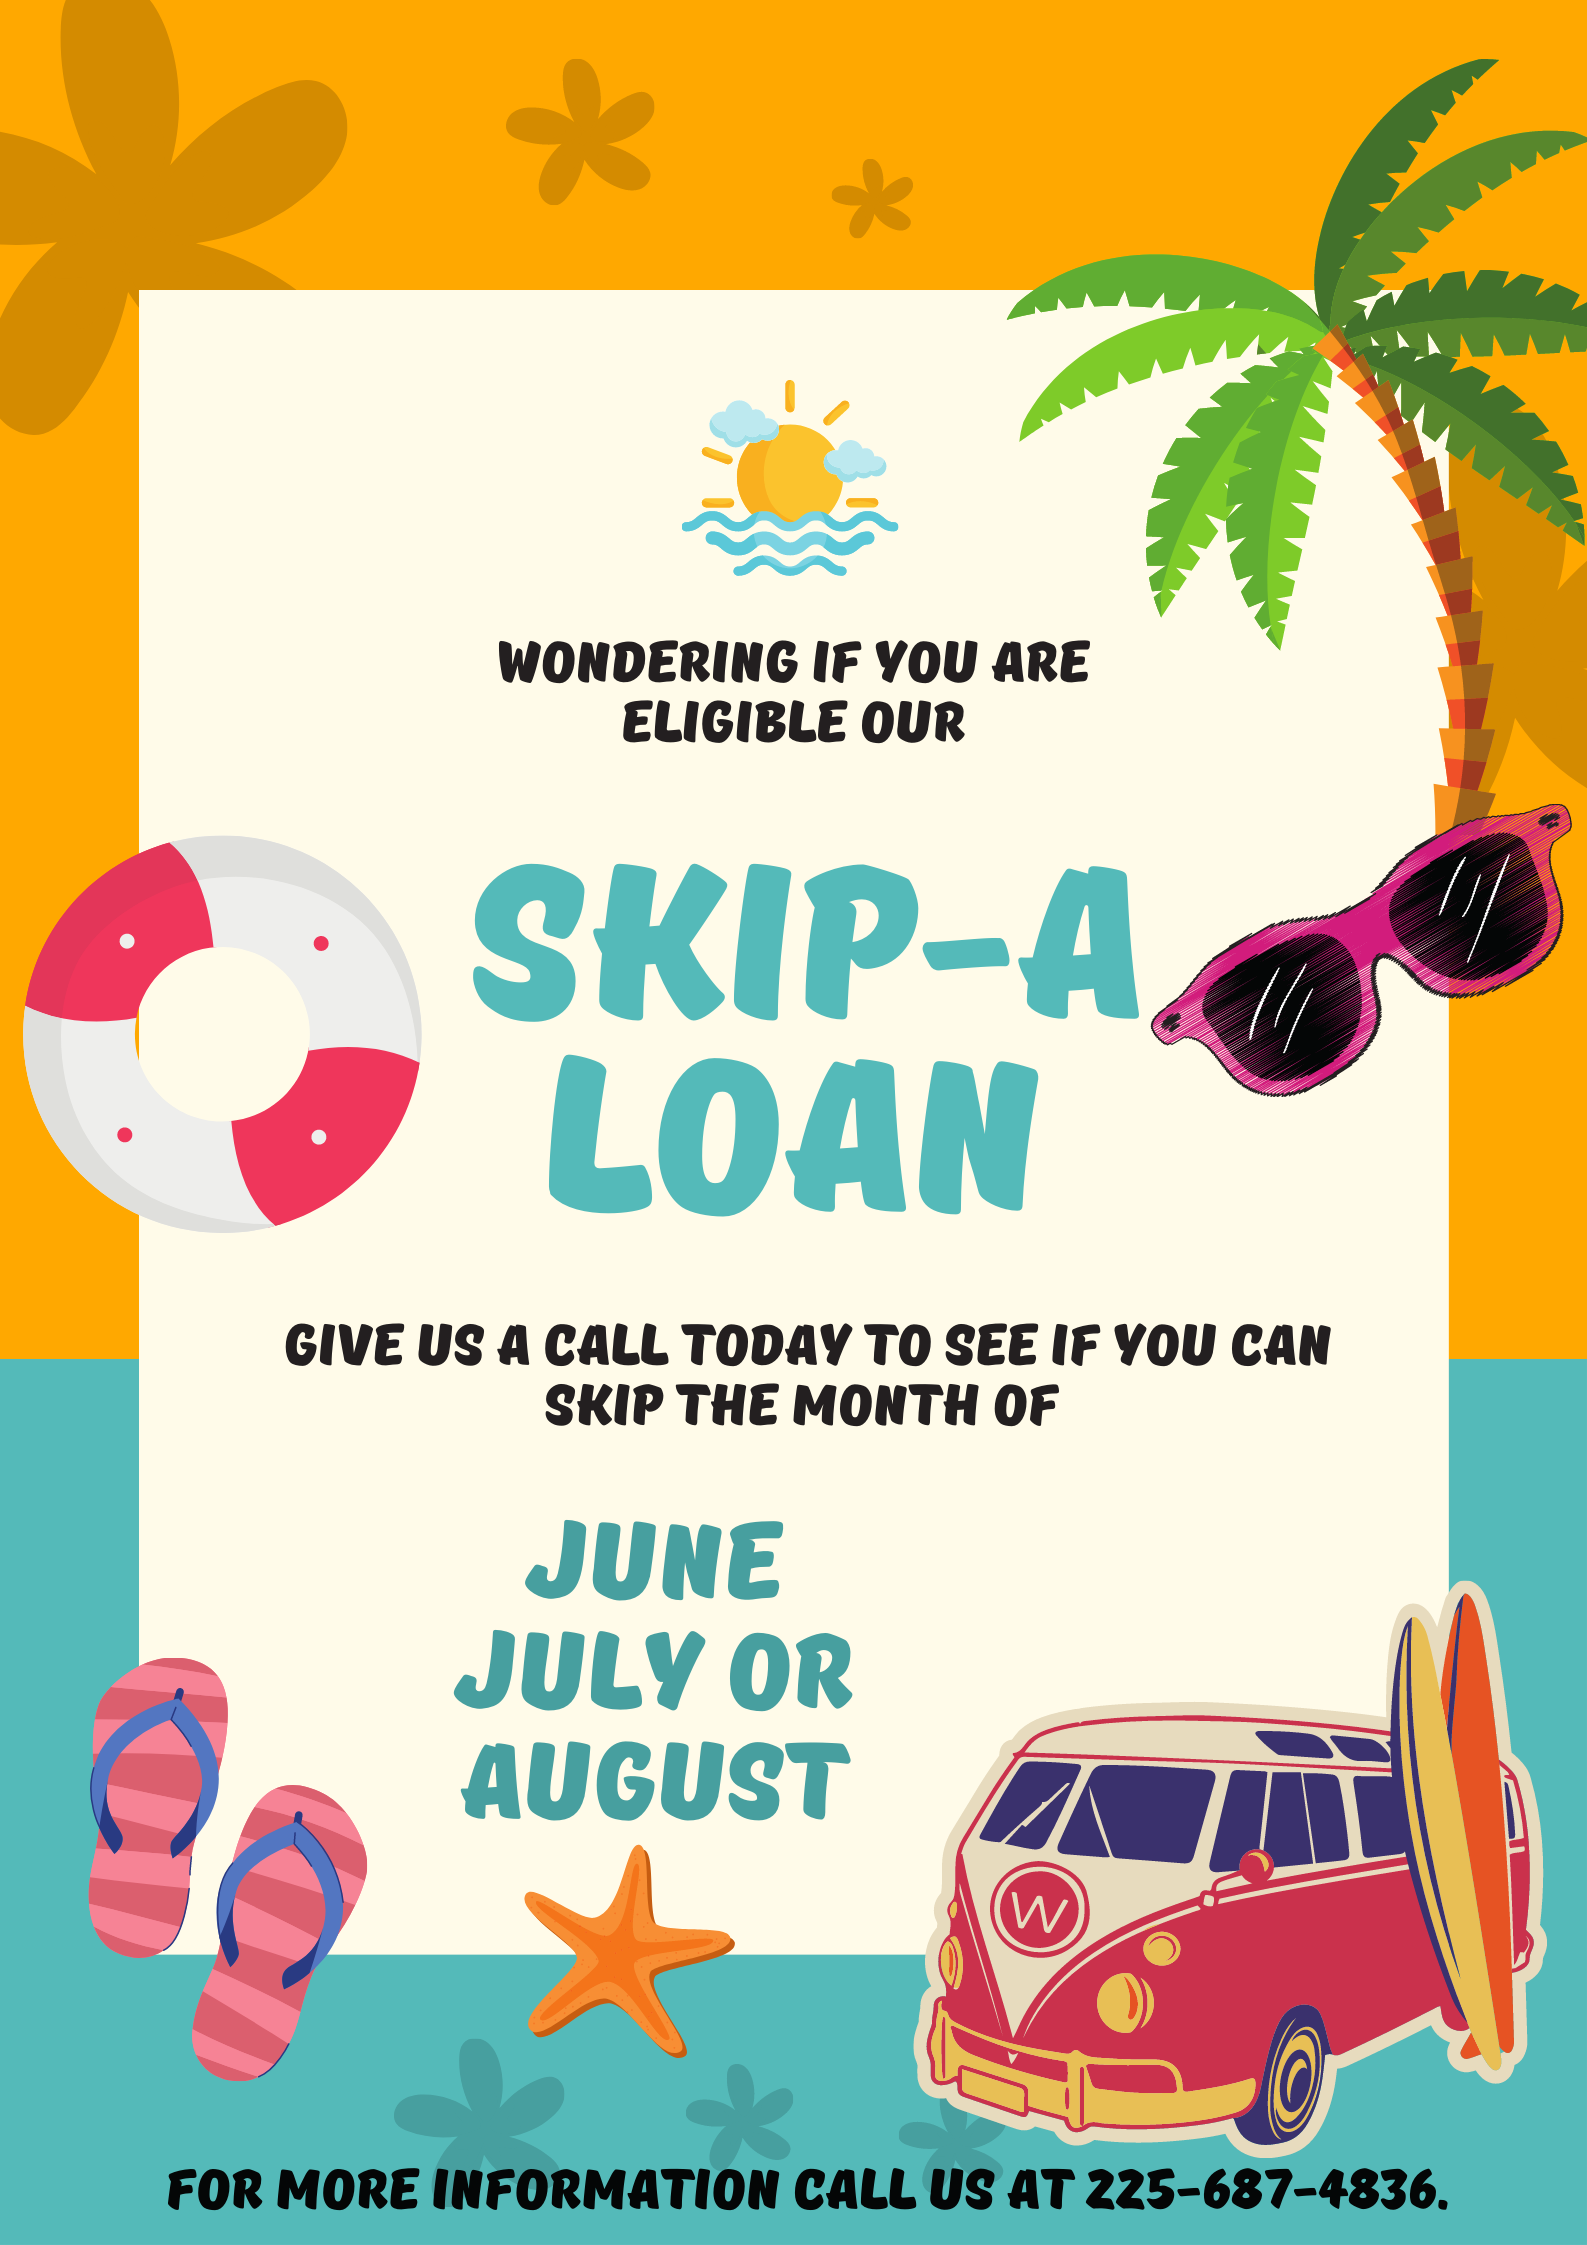 Do you need some extra cash for the summer